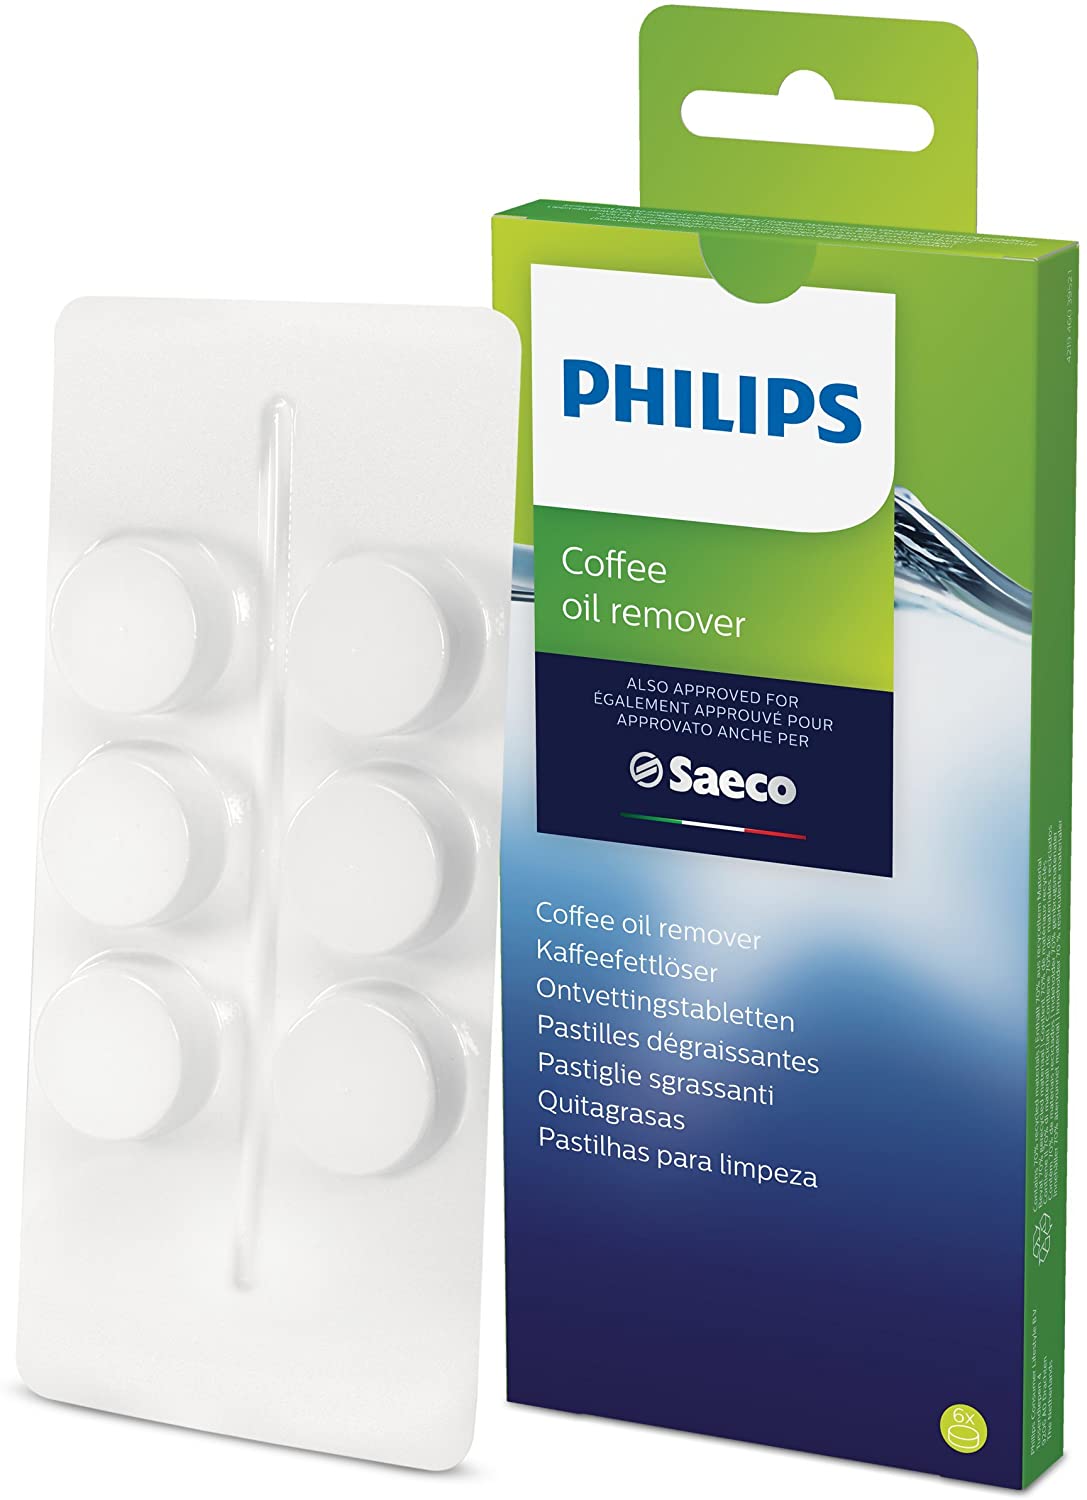 Philips Ca6704 / 10 Coffee Oil Remover, 6 Tablets For Philips, Saeco And Ot